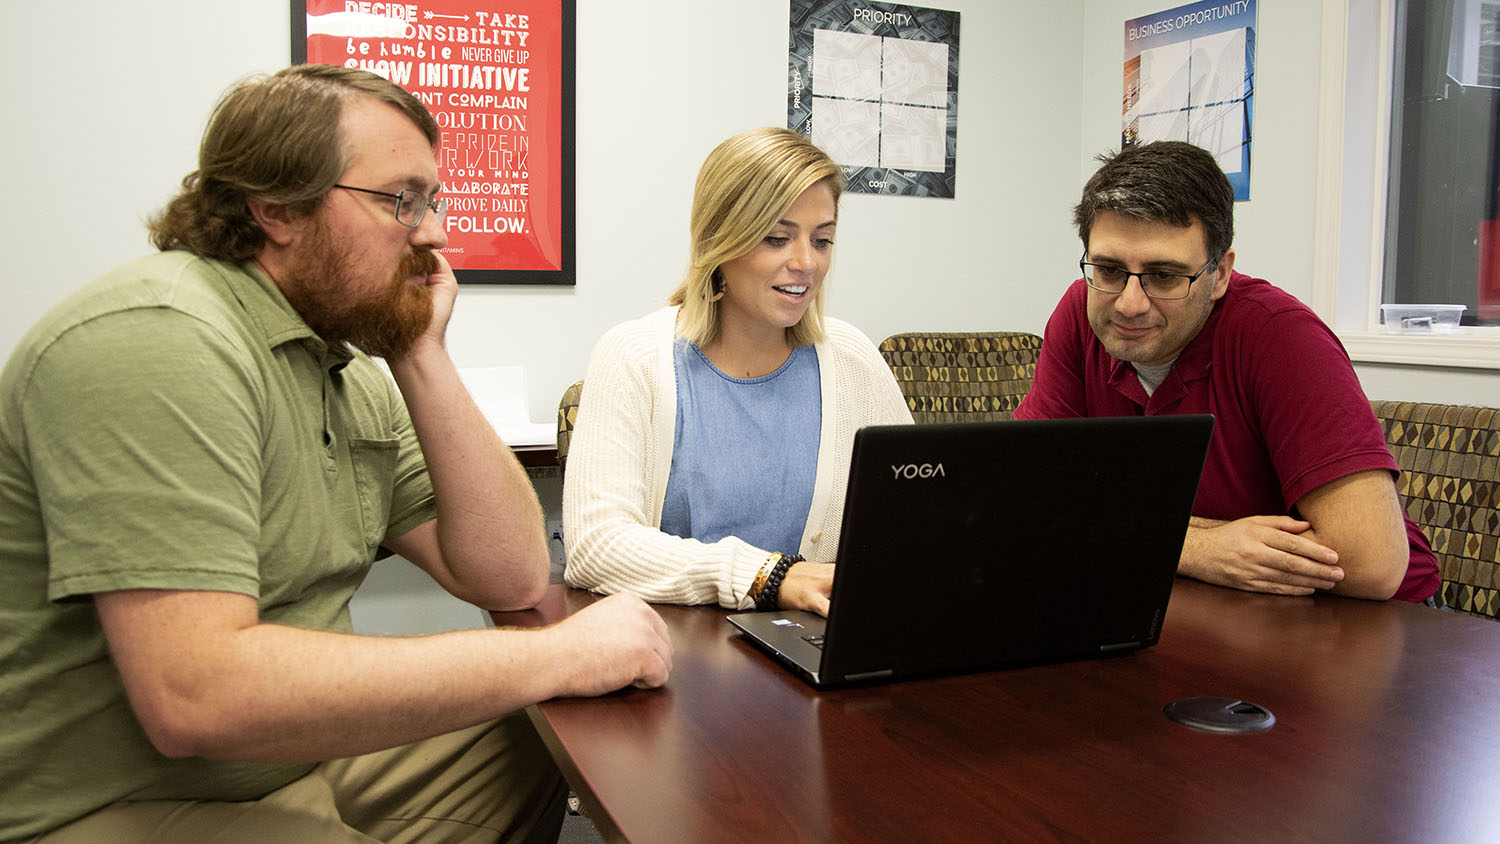 Caroline Olson, a Kenan Fellow, types on a laptop at a table as her two mentors look over her work.